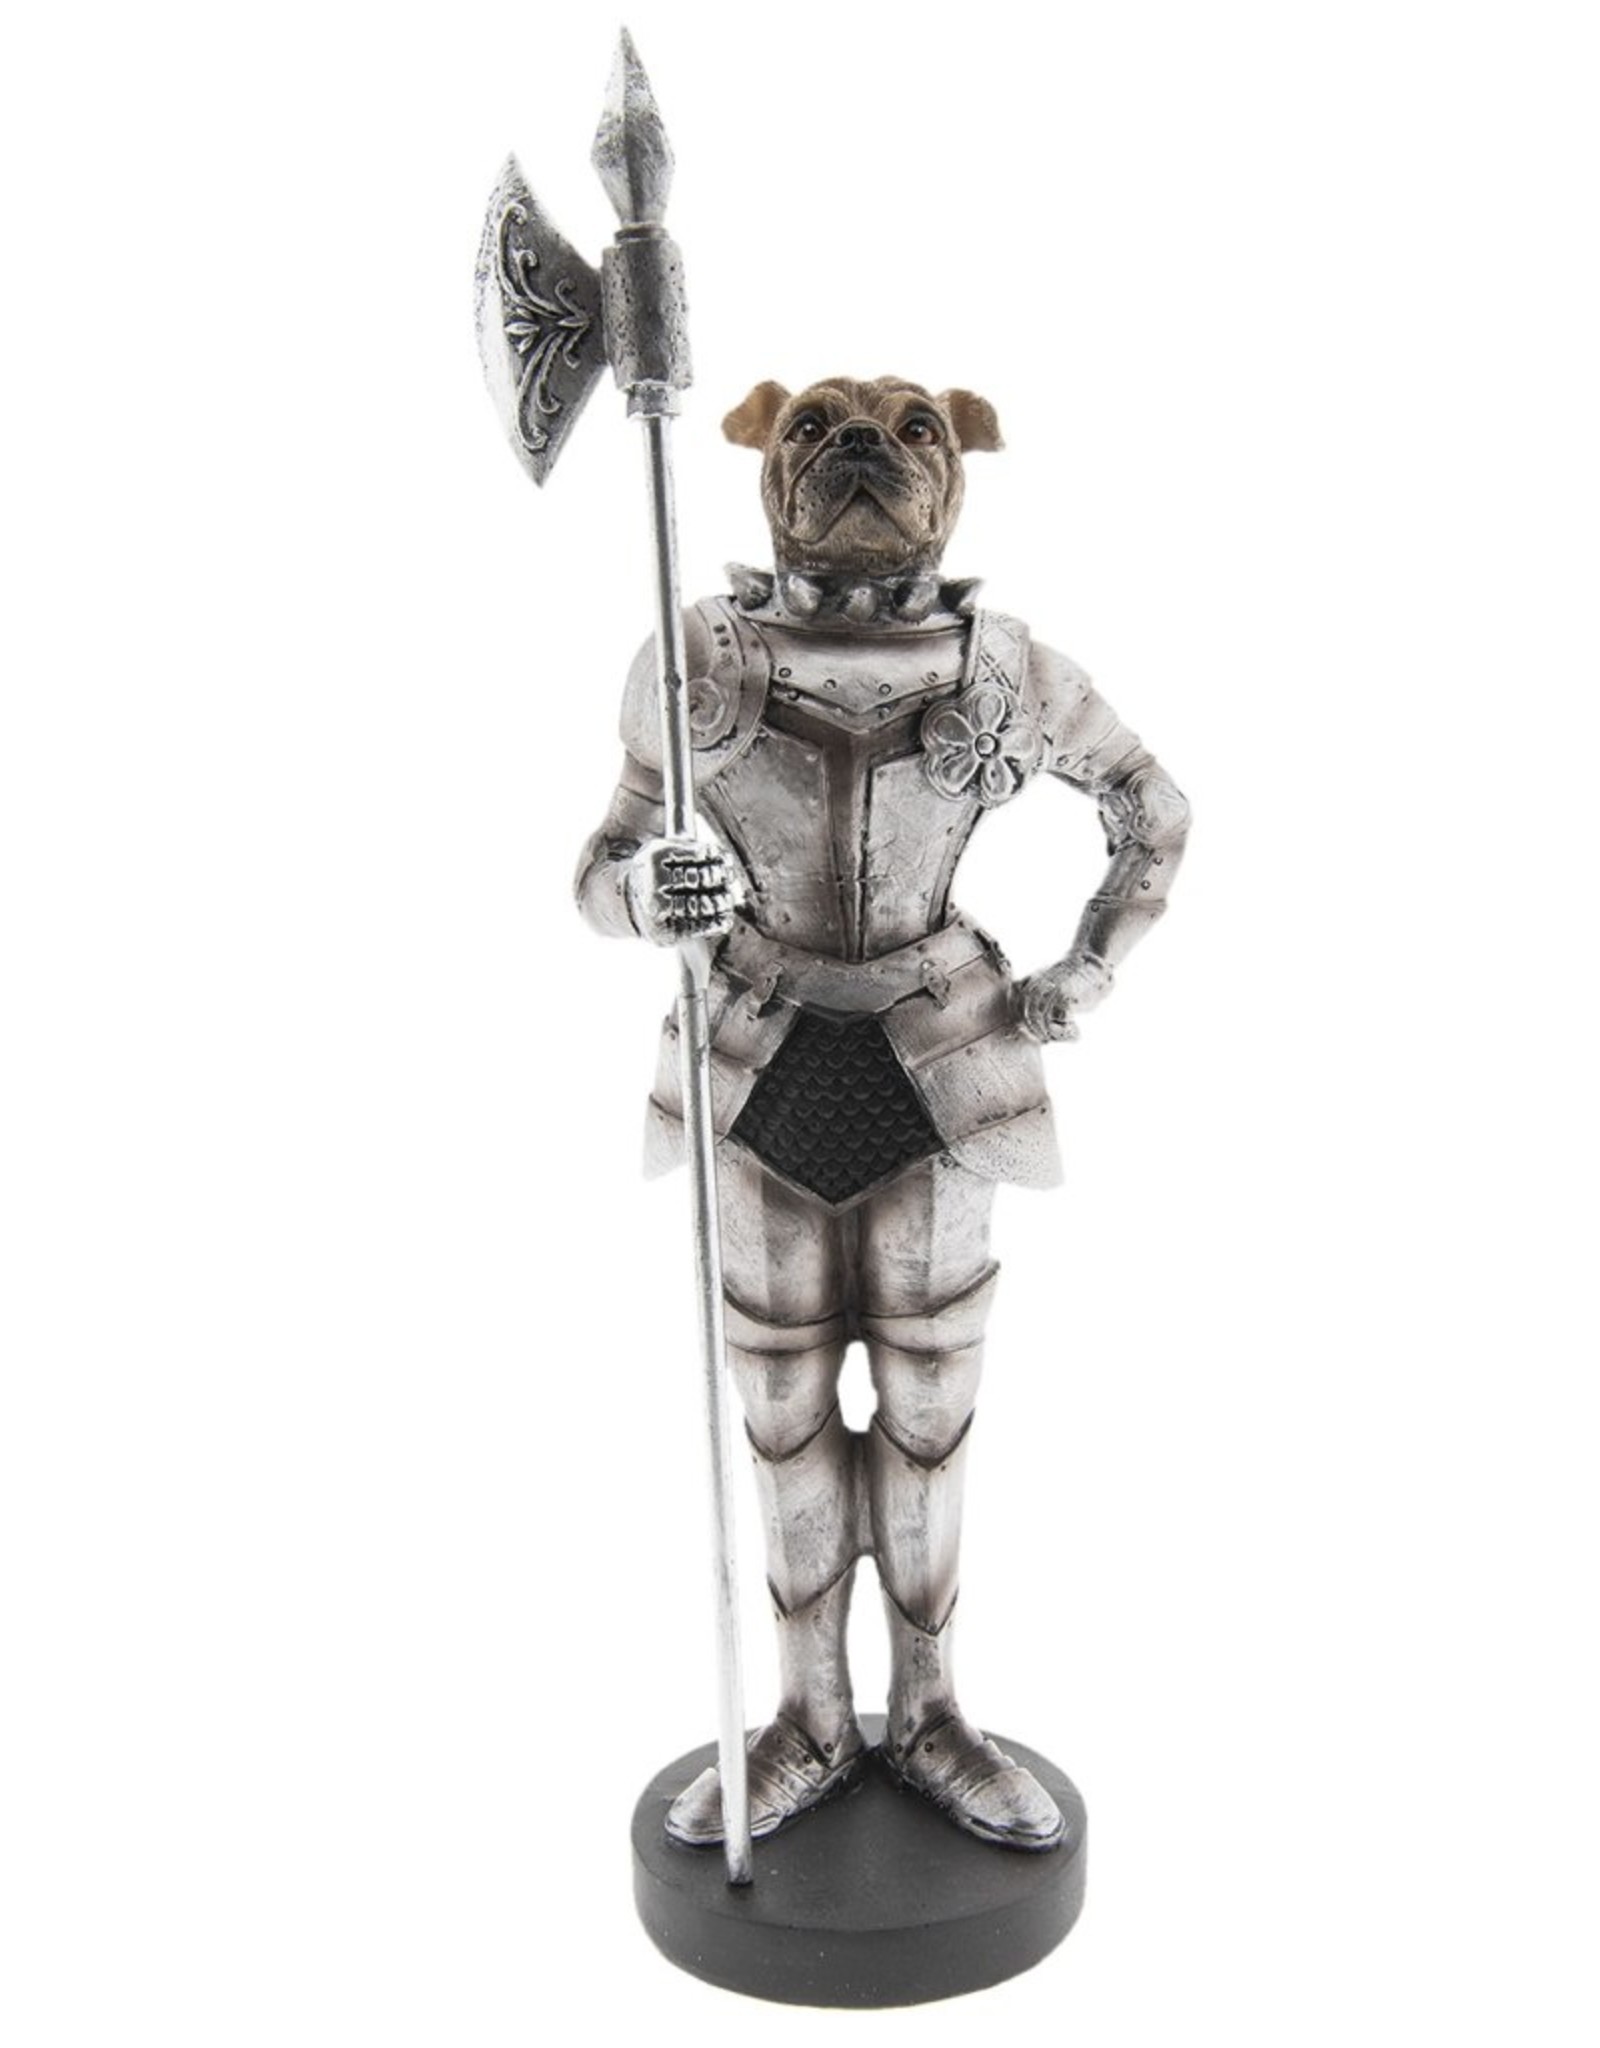 C&E Giftware Figurines Collectables - Bulldog Medieval Knight statue 33cm